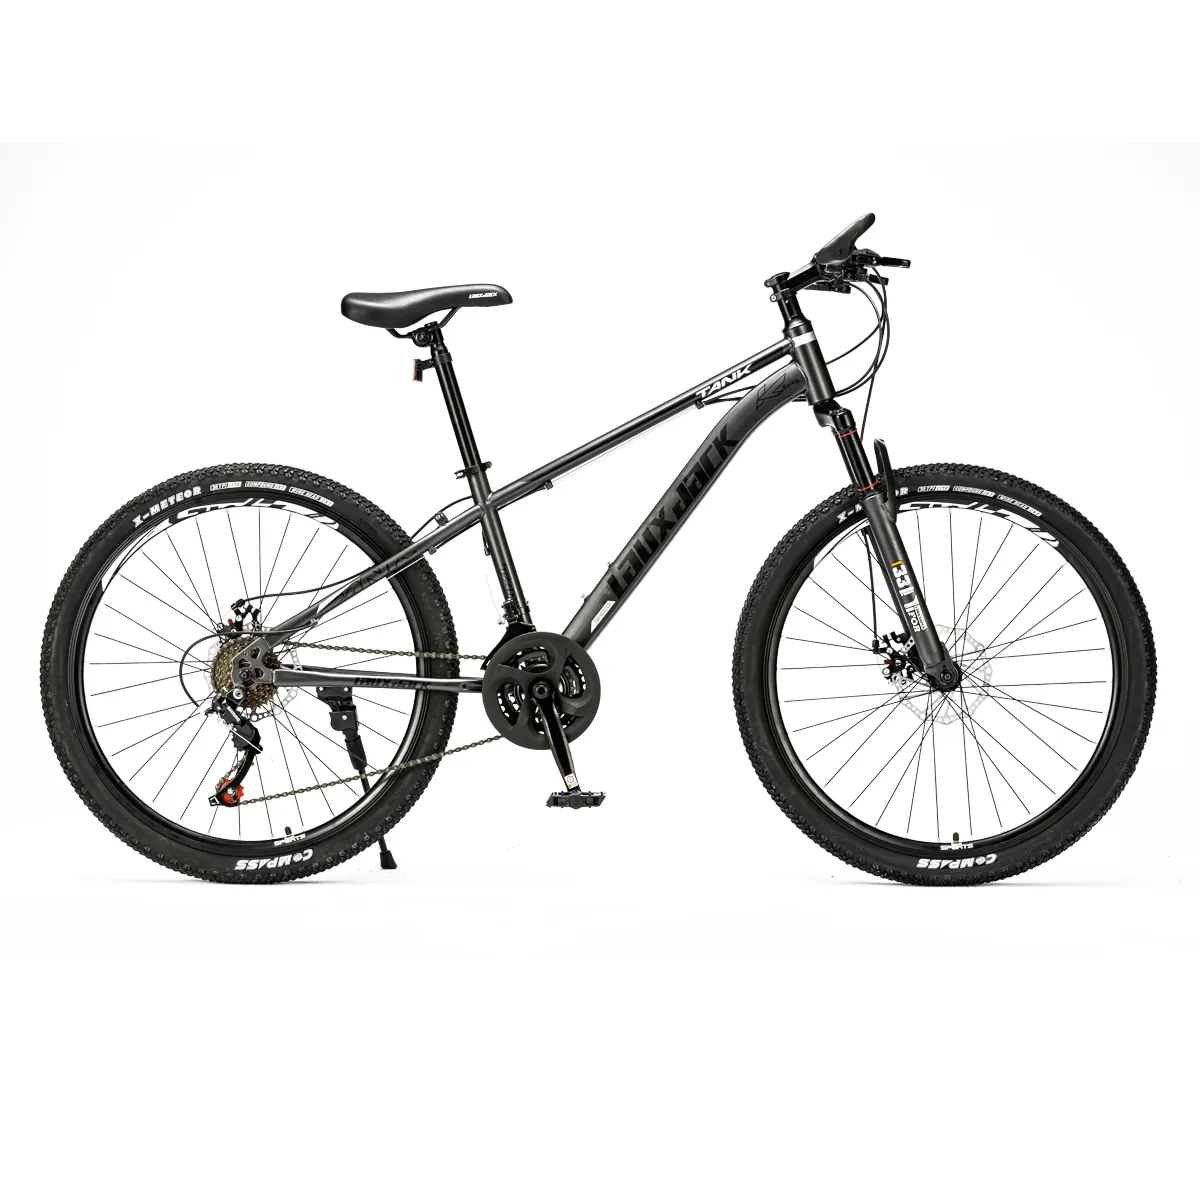 Hot selling product best hi-carbon steel 21 speed 27.5 bicycle 29 inch full suspension double disc brake mtb,mountain bike